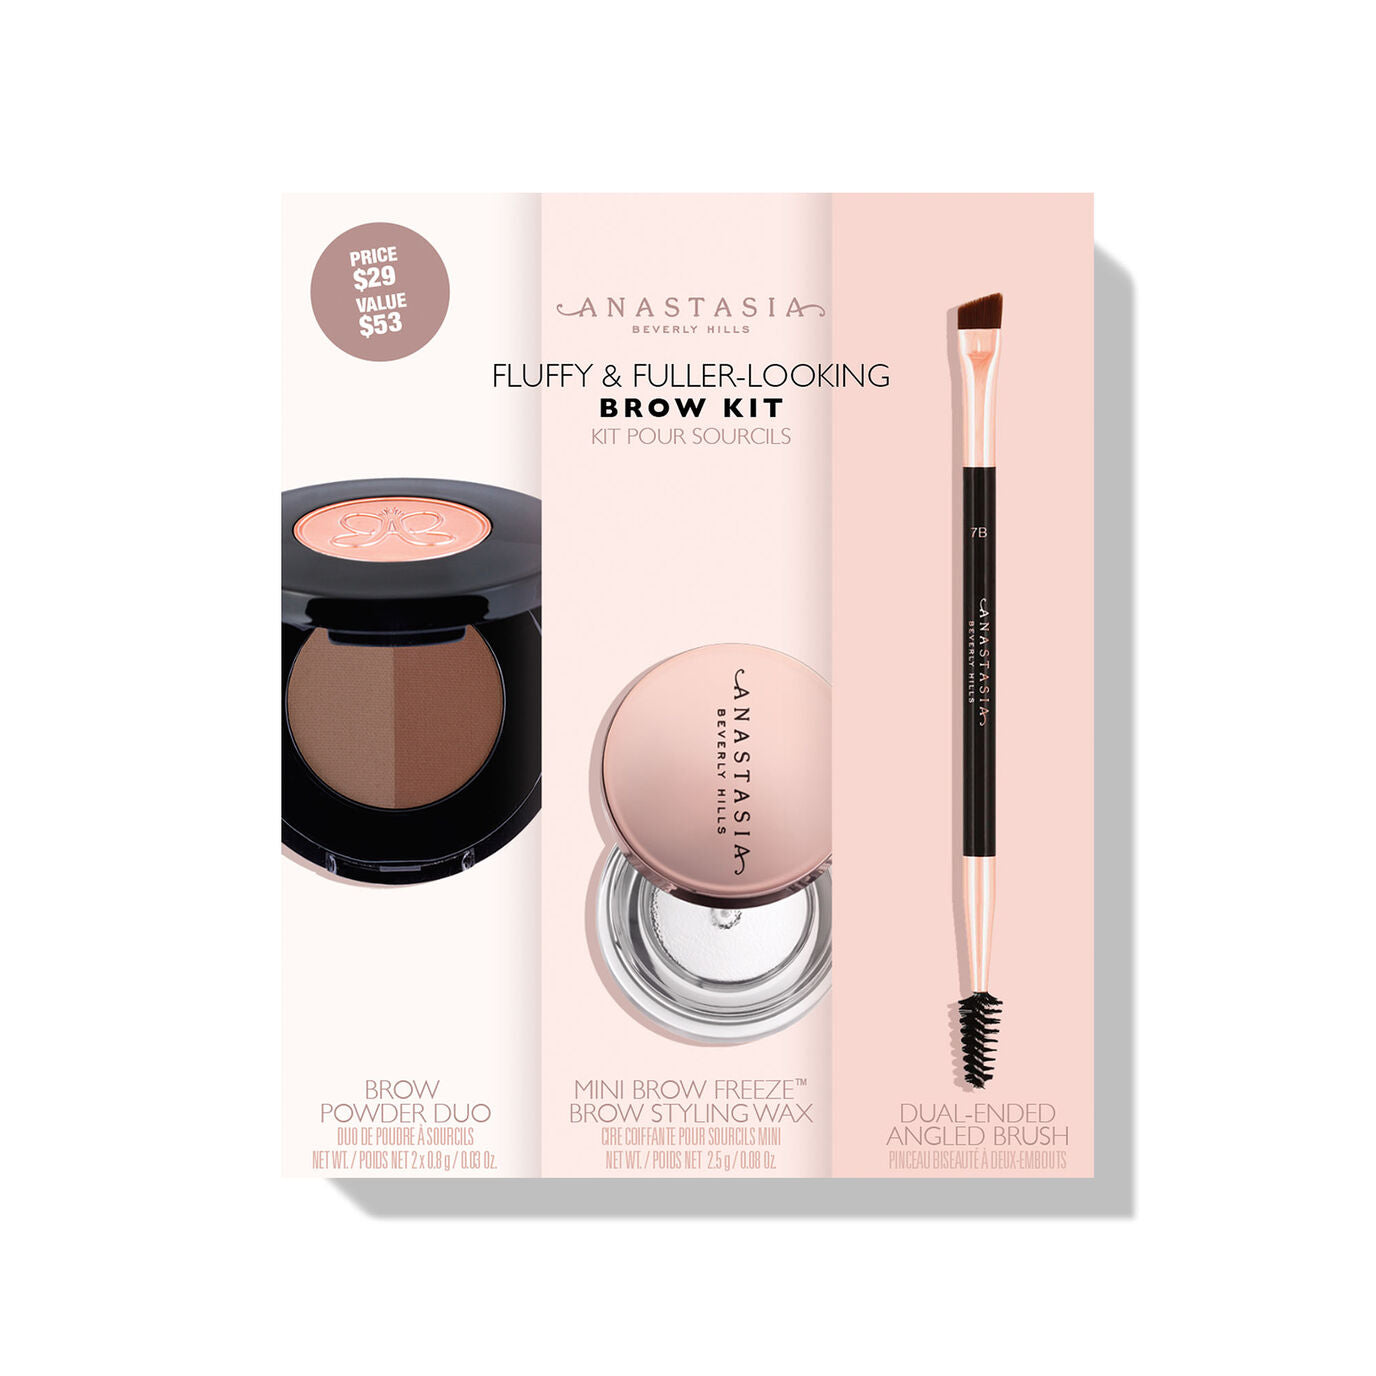 Anastasia Fluffy & Fuller-Looking Brow Kit - Soft Brown